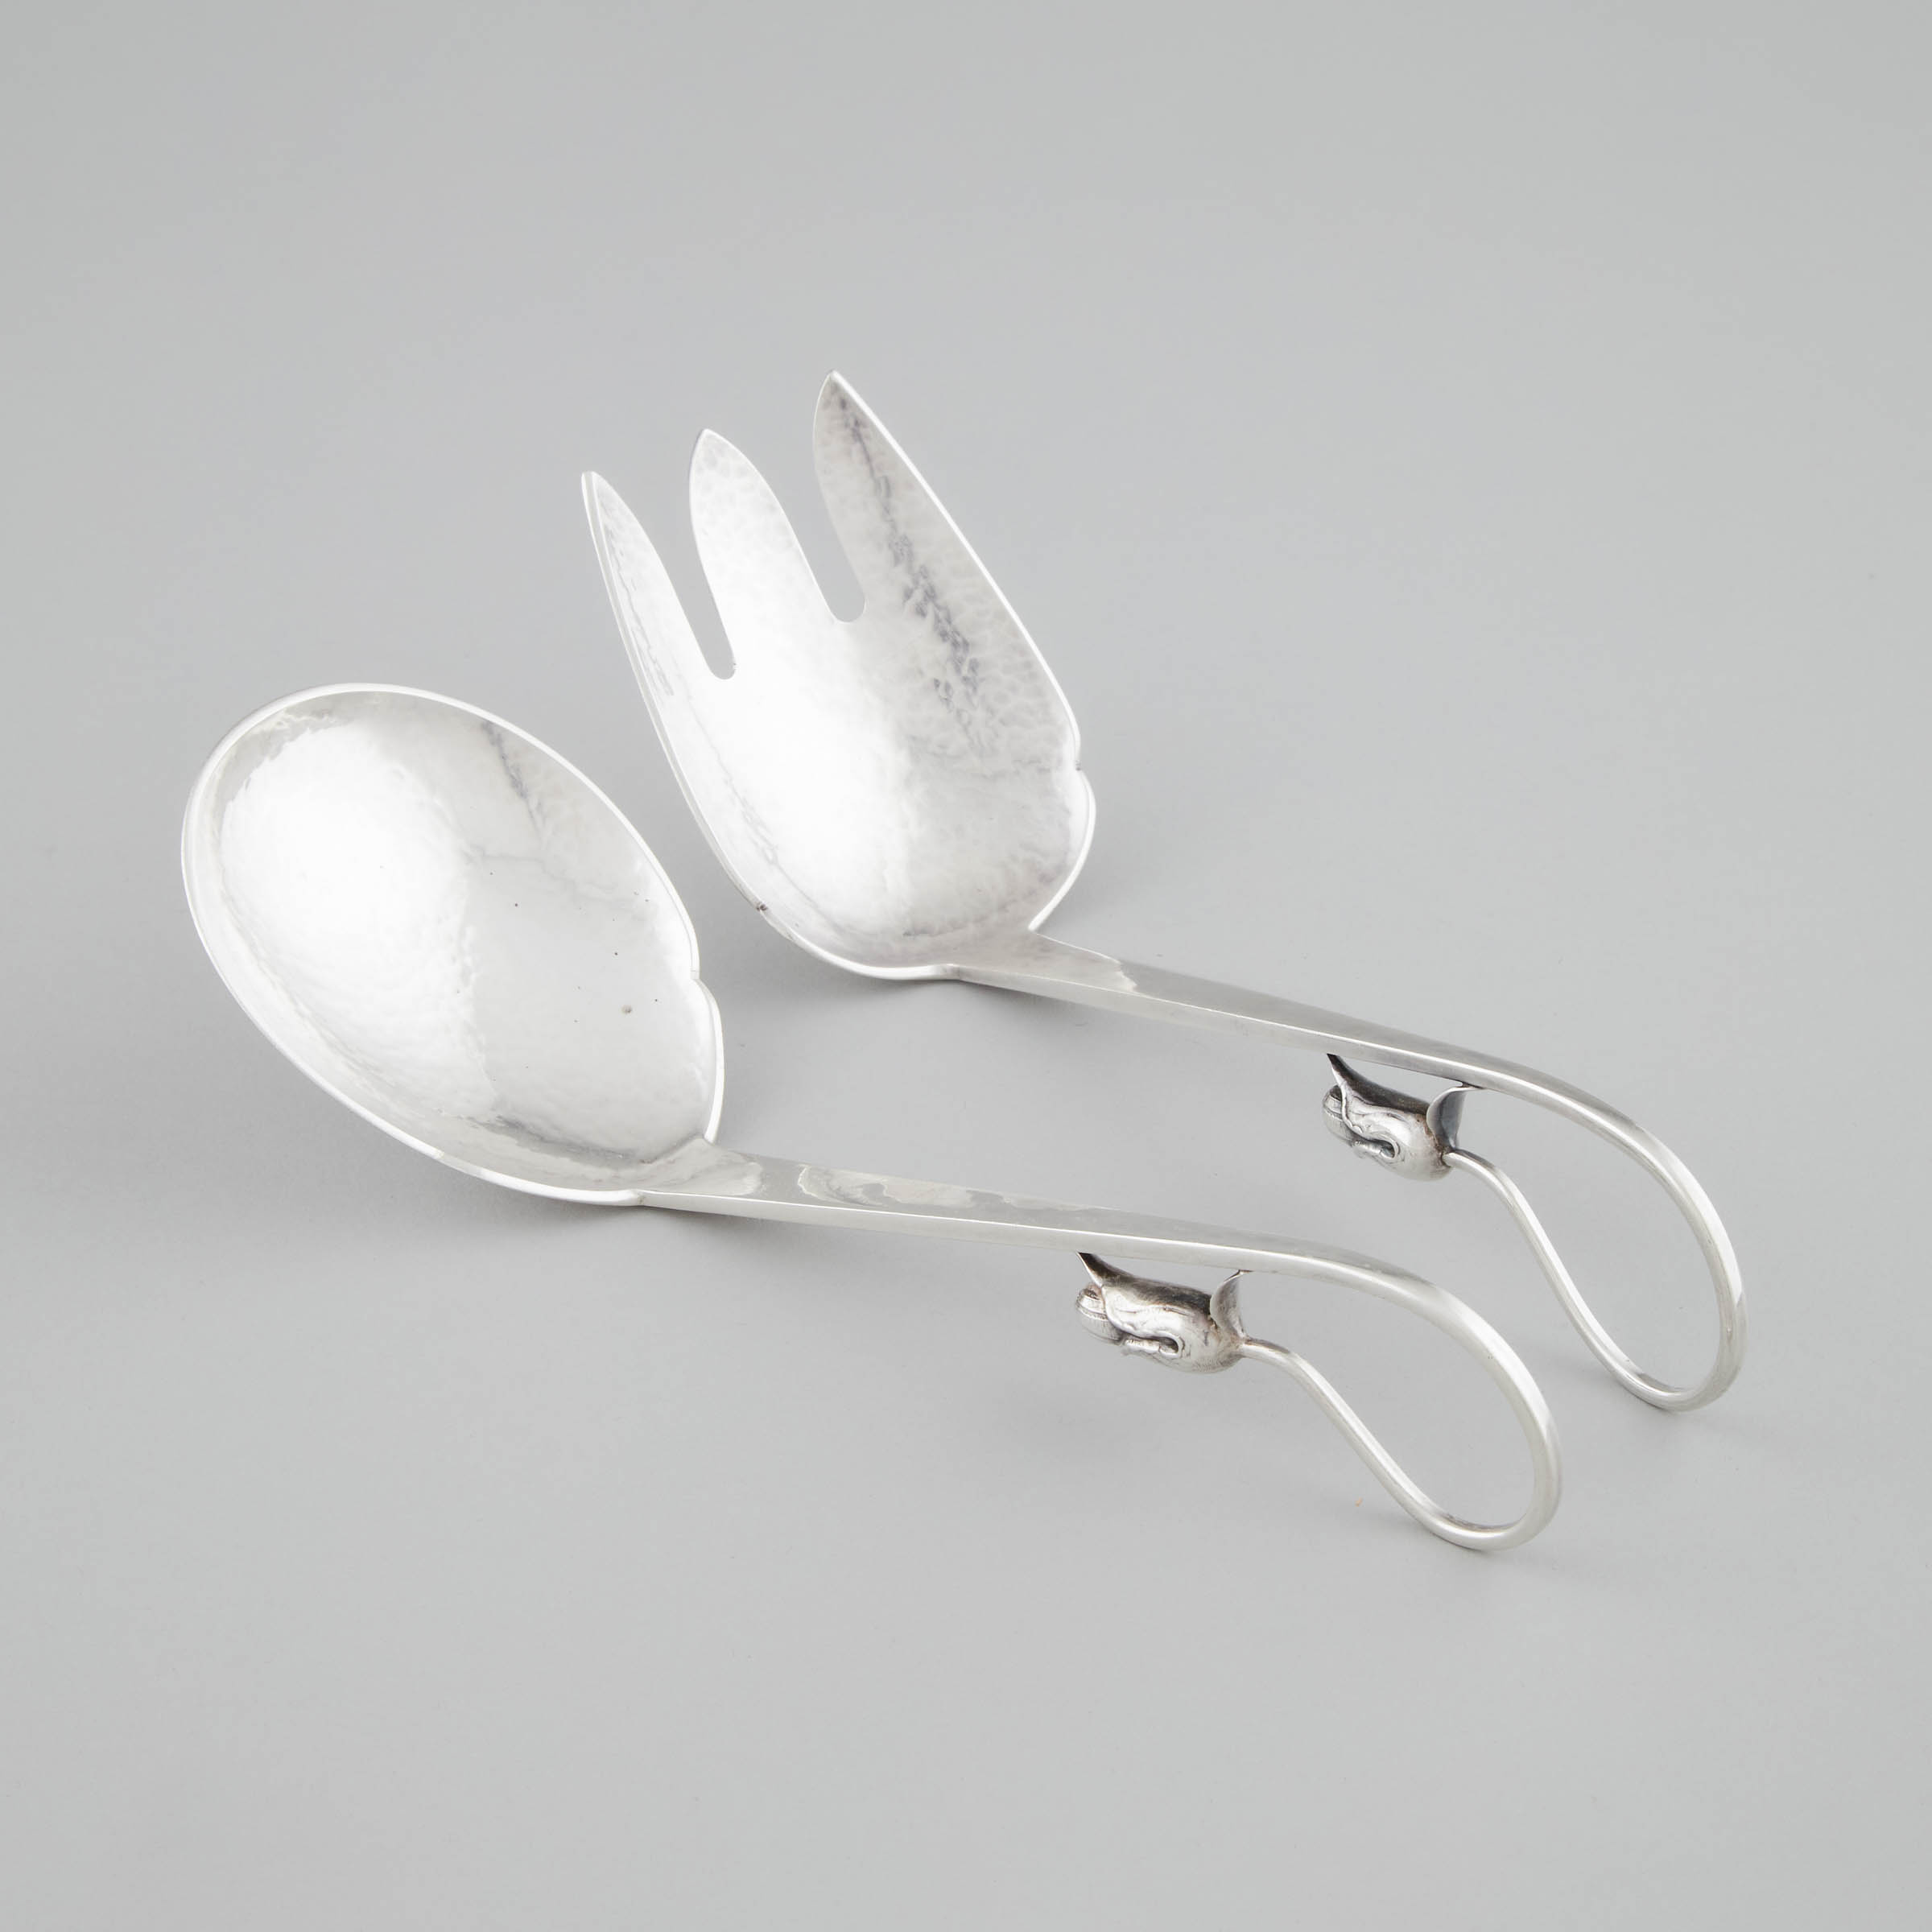 Pair of Canadian Silver Salad Servers, Carl Poul Petersen, Montreal, Que., mid-20th century